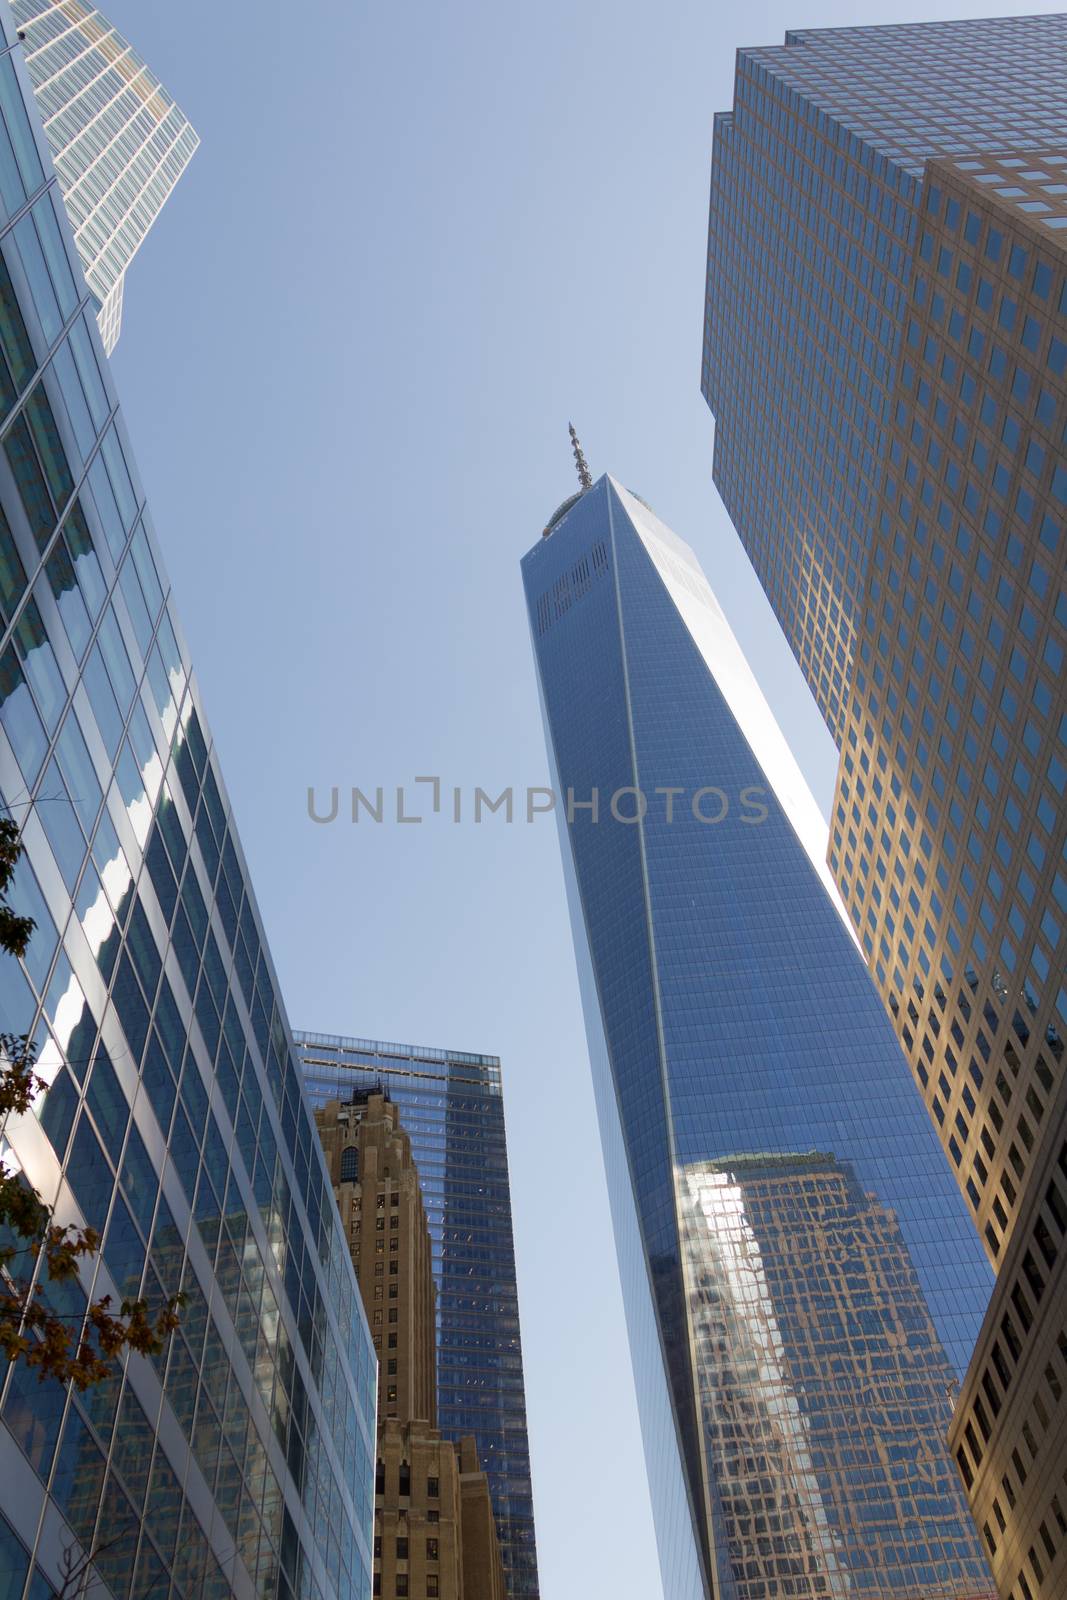 Center New York City Scyscrapers Financial district cityscape by 1shostak